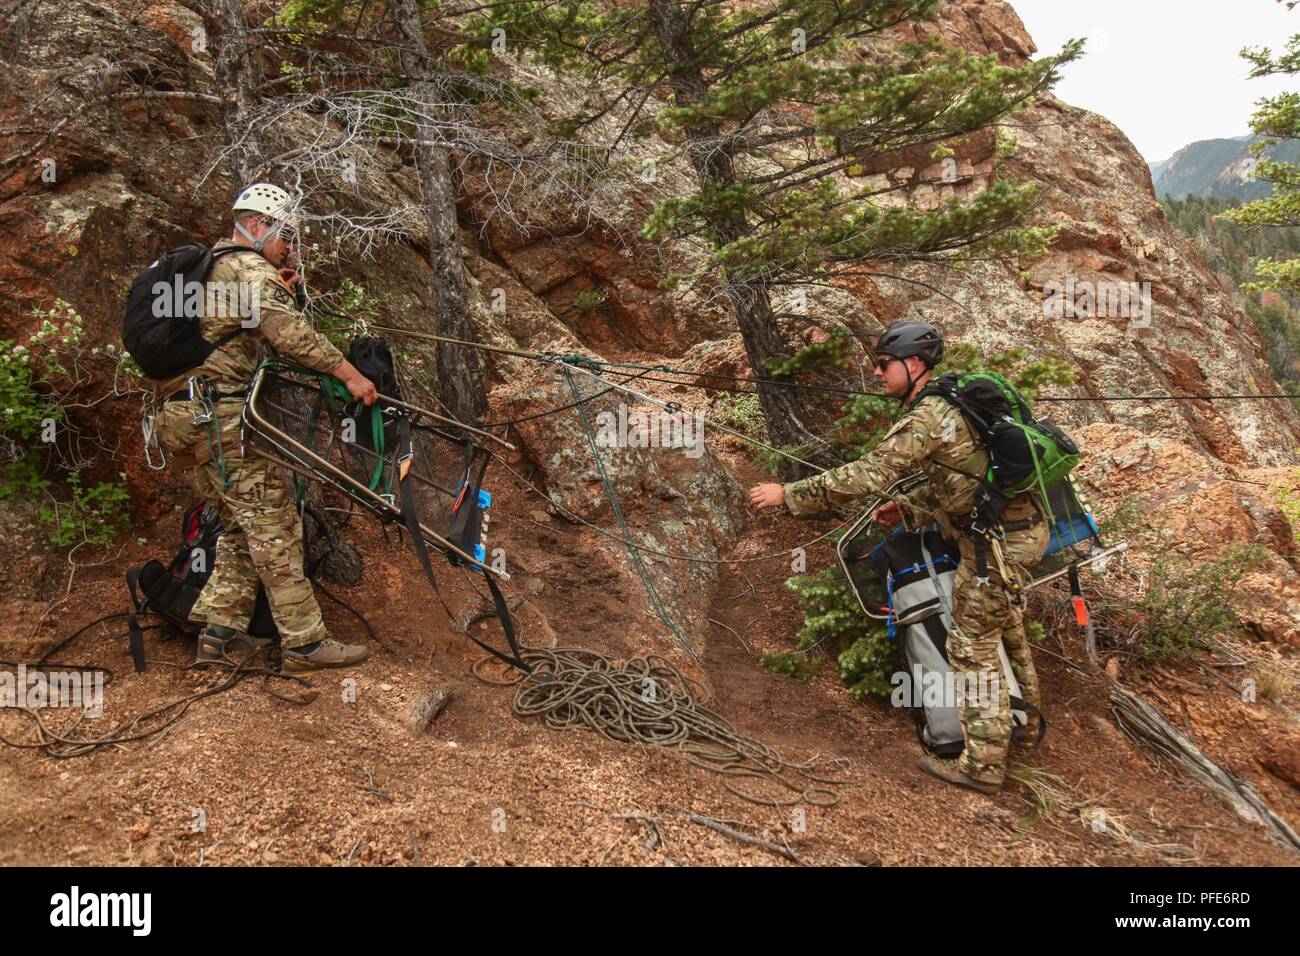 Green Berets, assigned to 10th Special Forces Group (Airborne), prepare to haul rescue equipment across a canyon using a rope system during personnel recovery training at Cheyenne Canyon, Colo., June 6, 2018.  Special Forces mountaineers routinely practice various mountain operations in difficult terrain in order to maintain proficiency for real world contingencies. Stock Photo